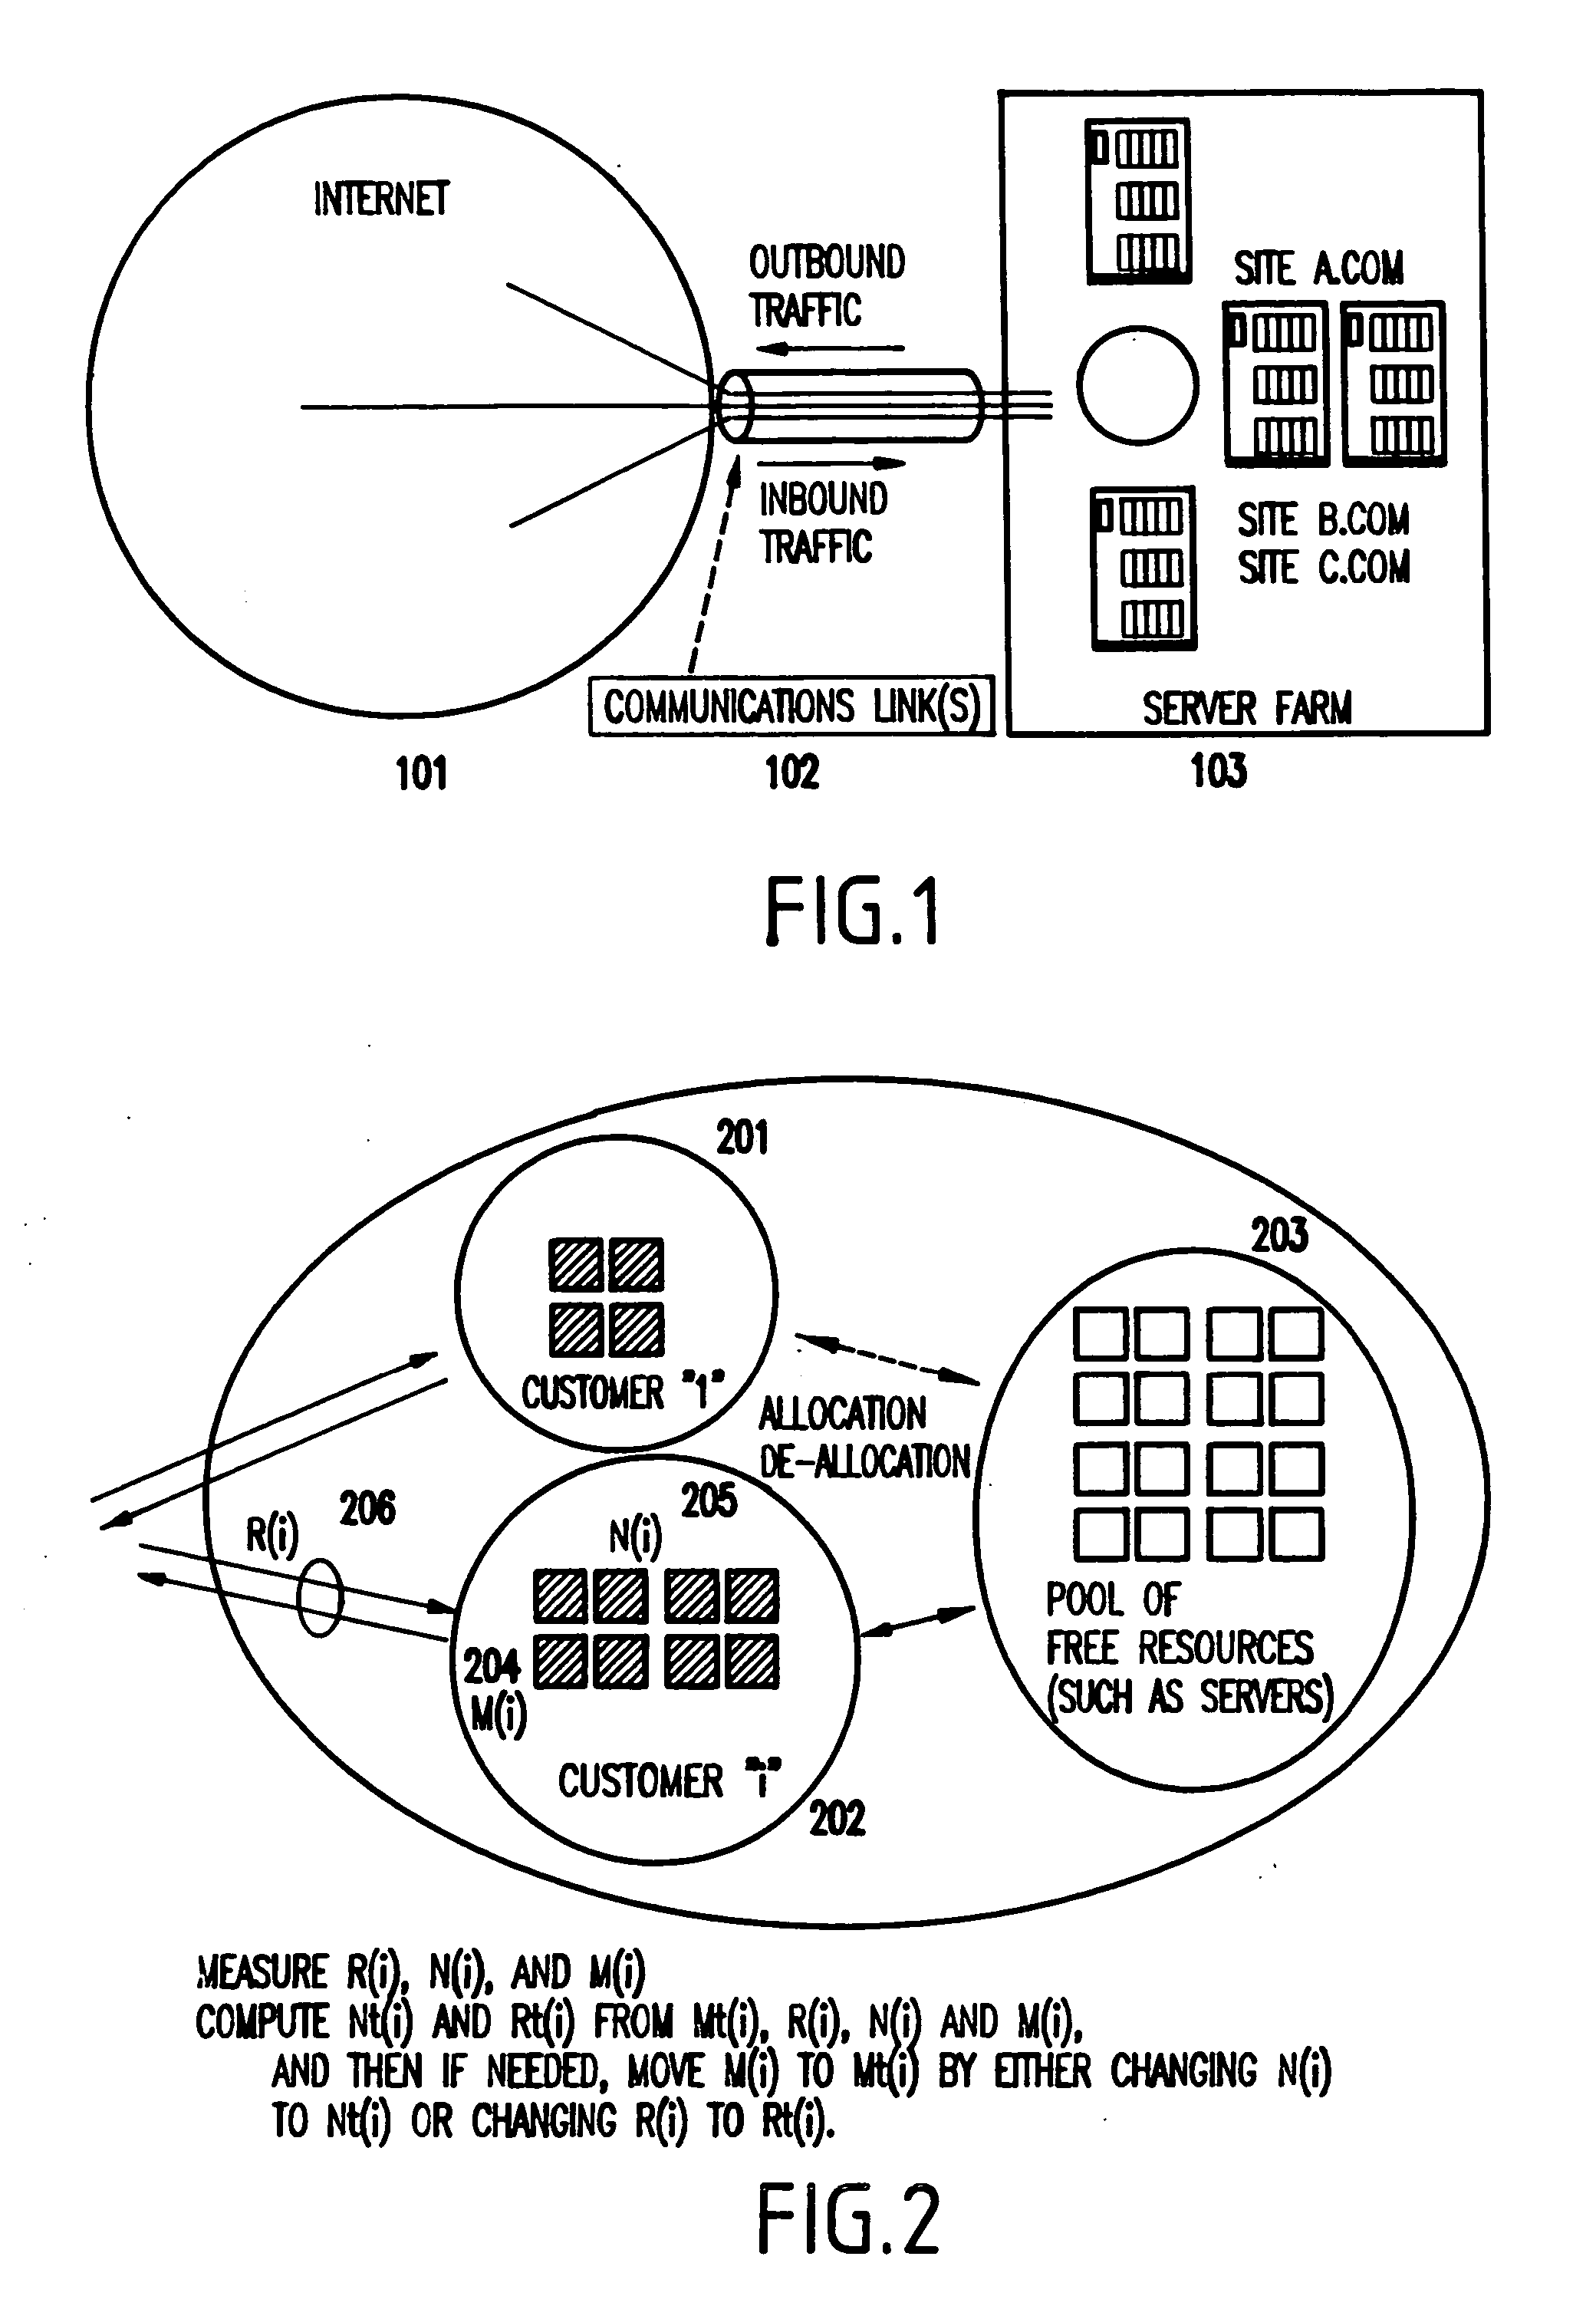 Method and apparatus for dynamically adjusting resources assigned to plurality of customers, for meeting service level agreements (SLAs) with minimal resources, and allowing common pools of resources to be used across plural customers on a demand basis